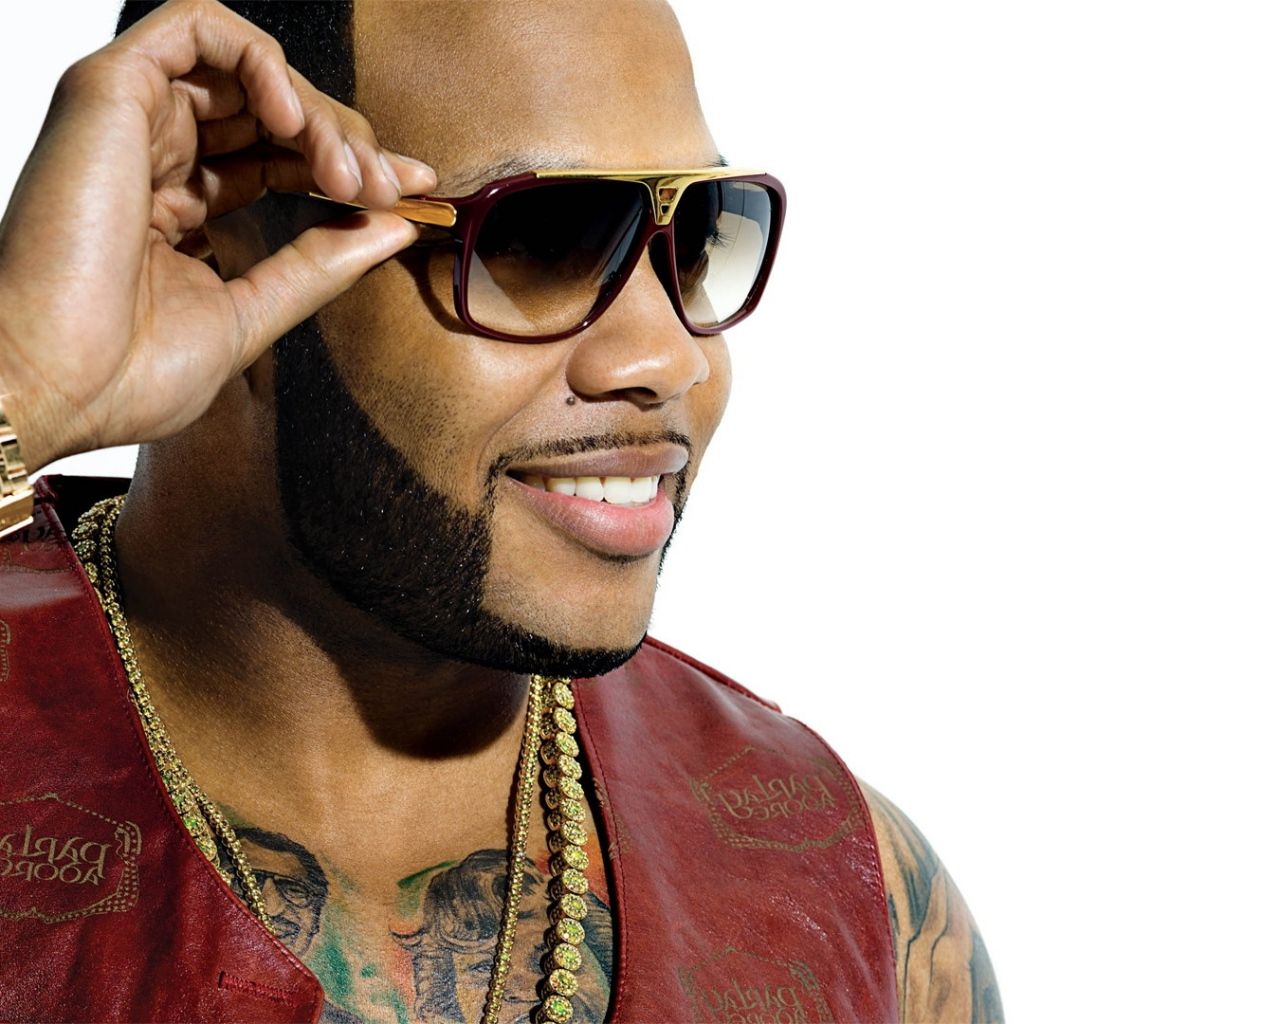 Download Wallpaper 1280x1024 Flo rida, Glasses, Smile, Watches ...